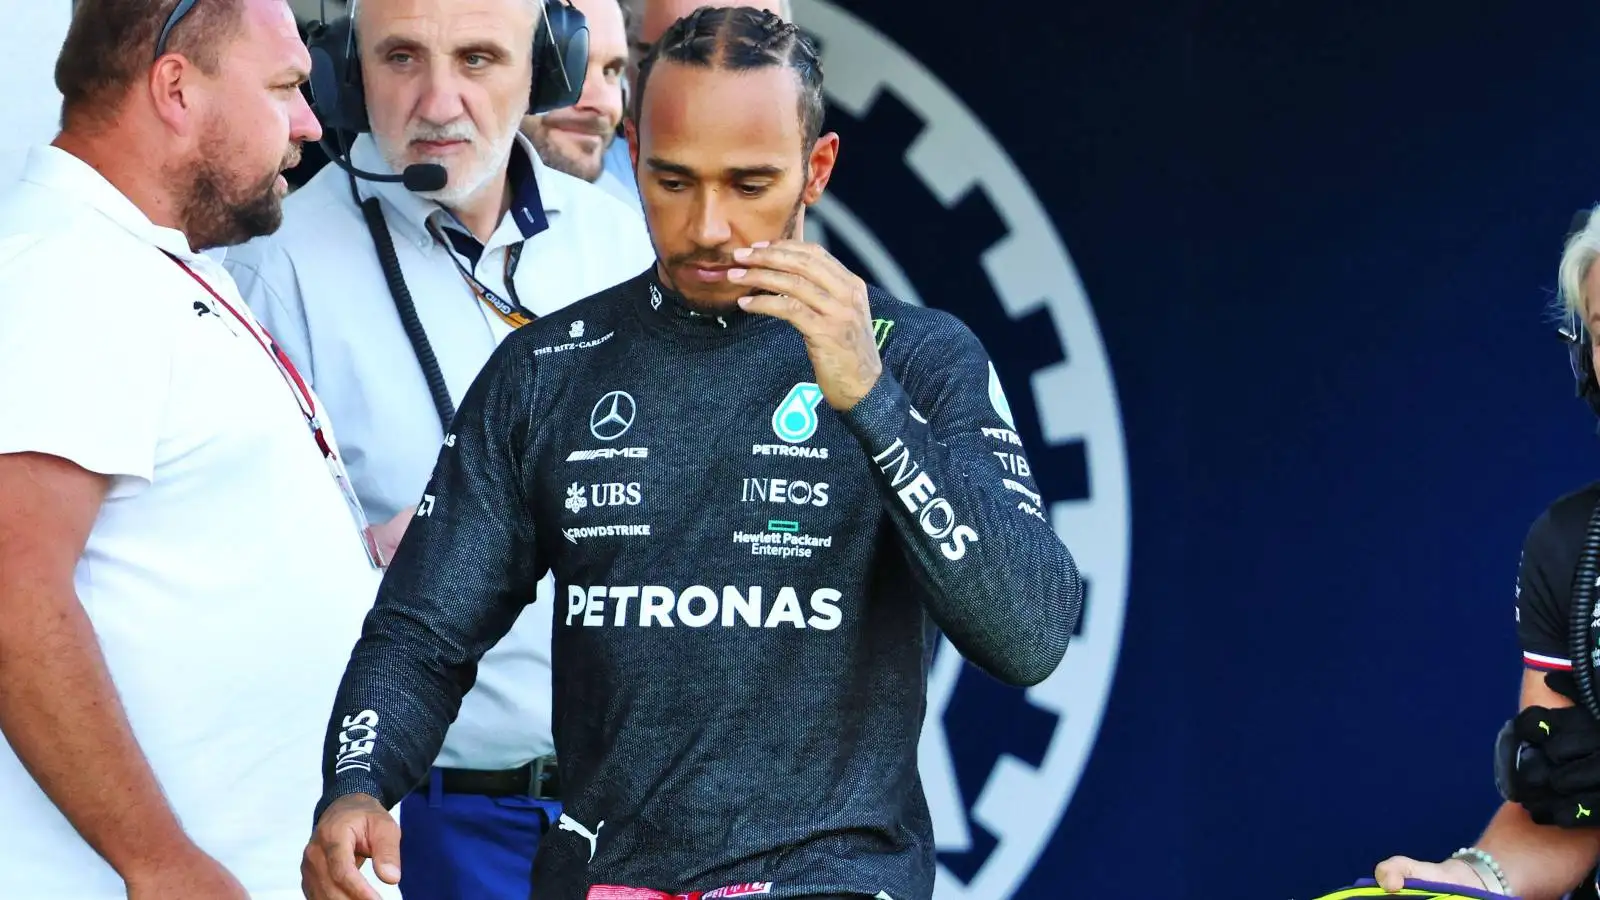 Lewis Hamilton, Mercedes, looks disappointed. Austria, July 2022.